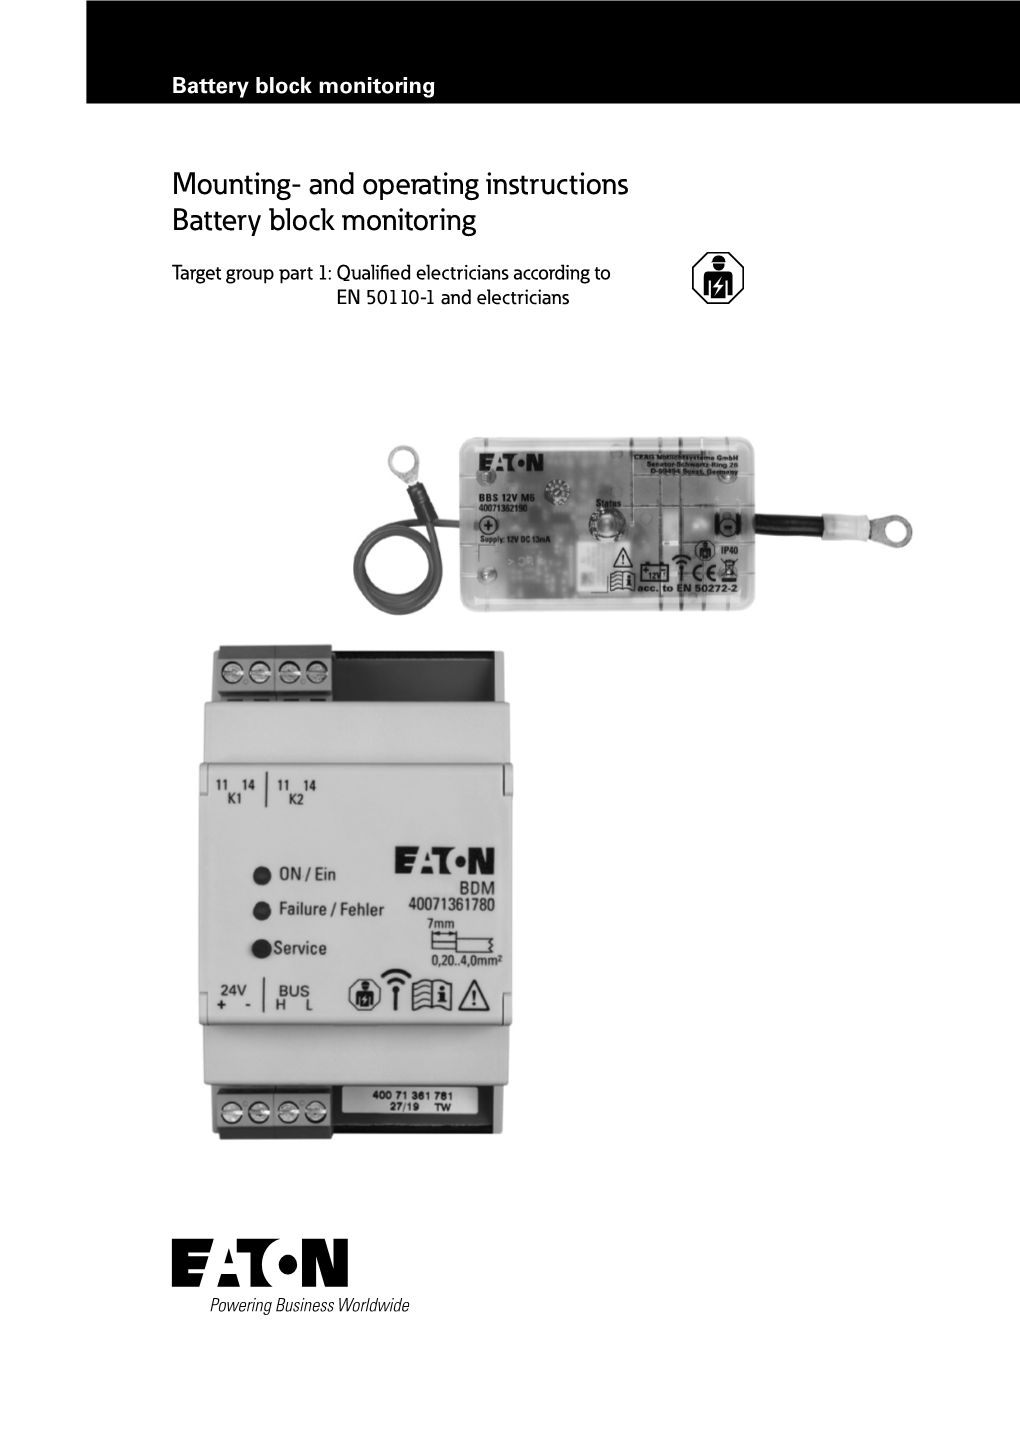 Mounting- and Operating Instructions Battery Block Monitoring